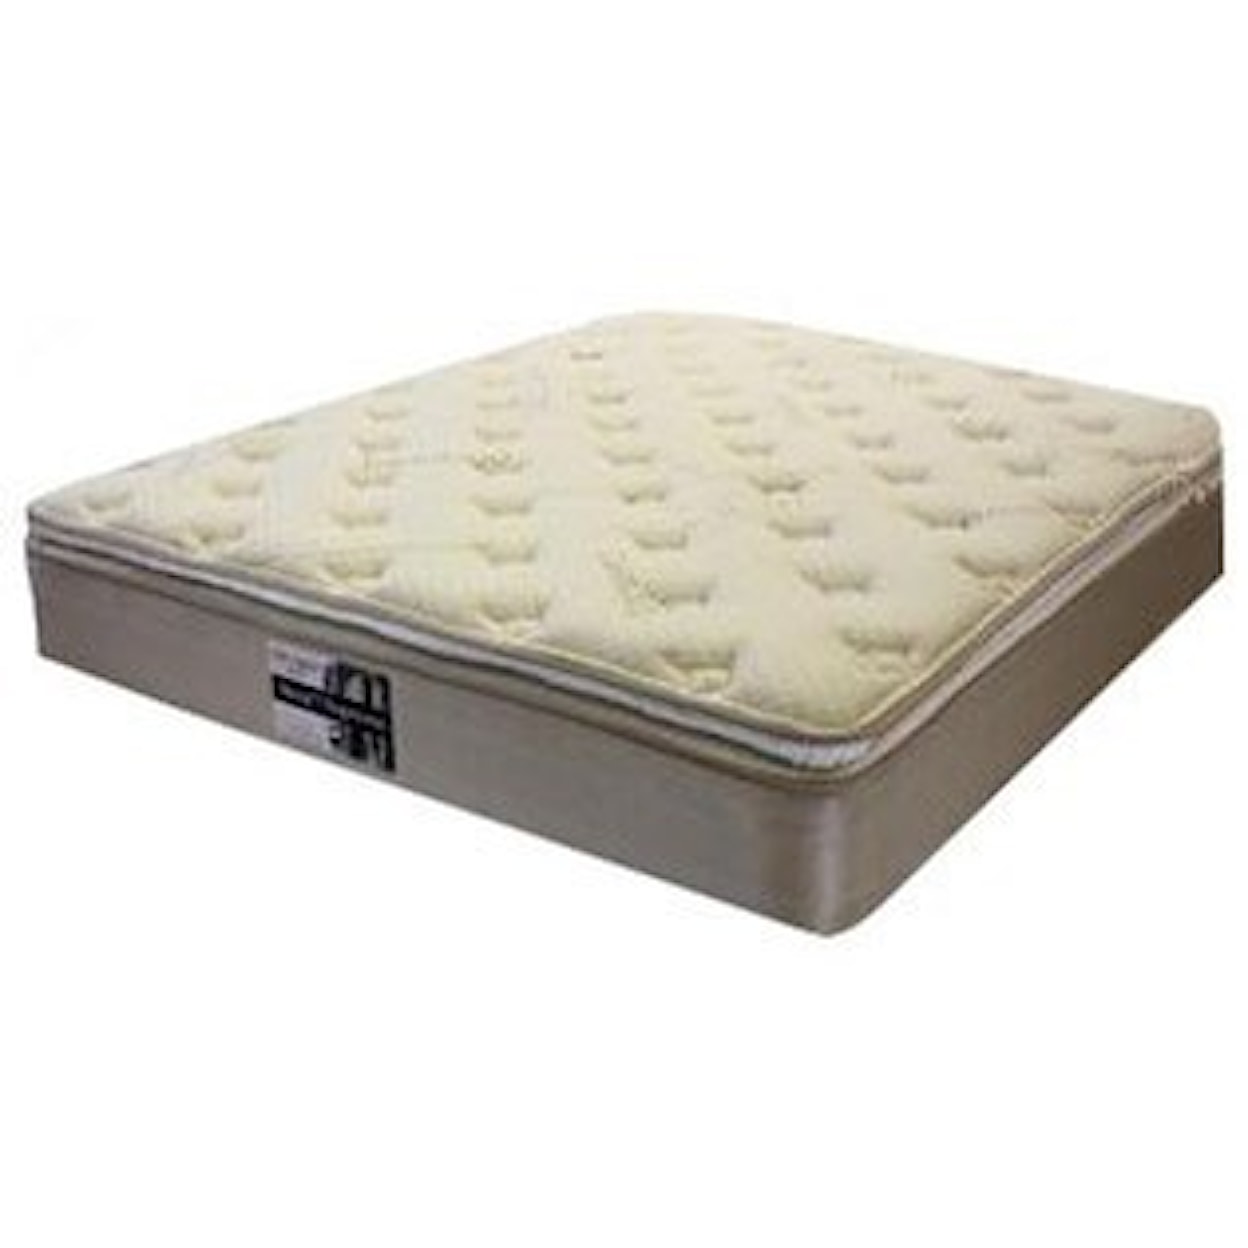 Golden Mattress Company Ortho Support 5000 Pillow Top Full Two Sided Pillow Top Mattress